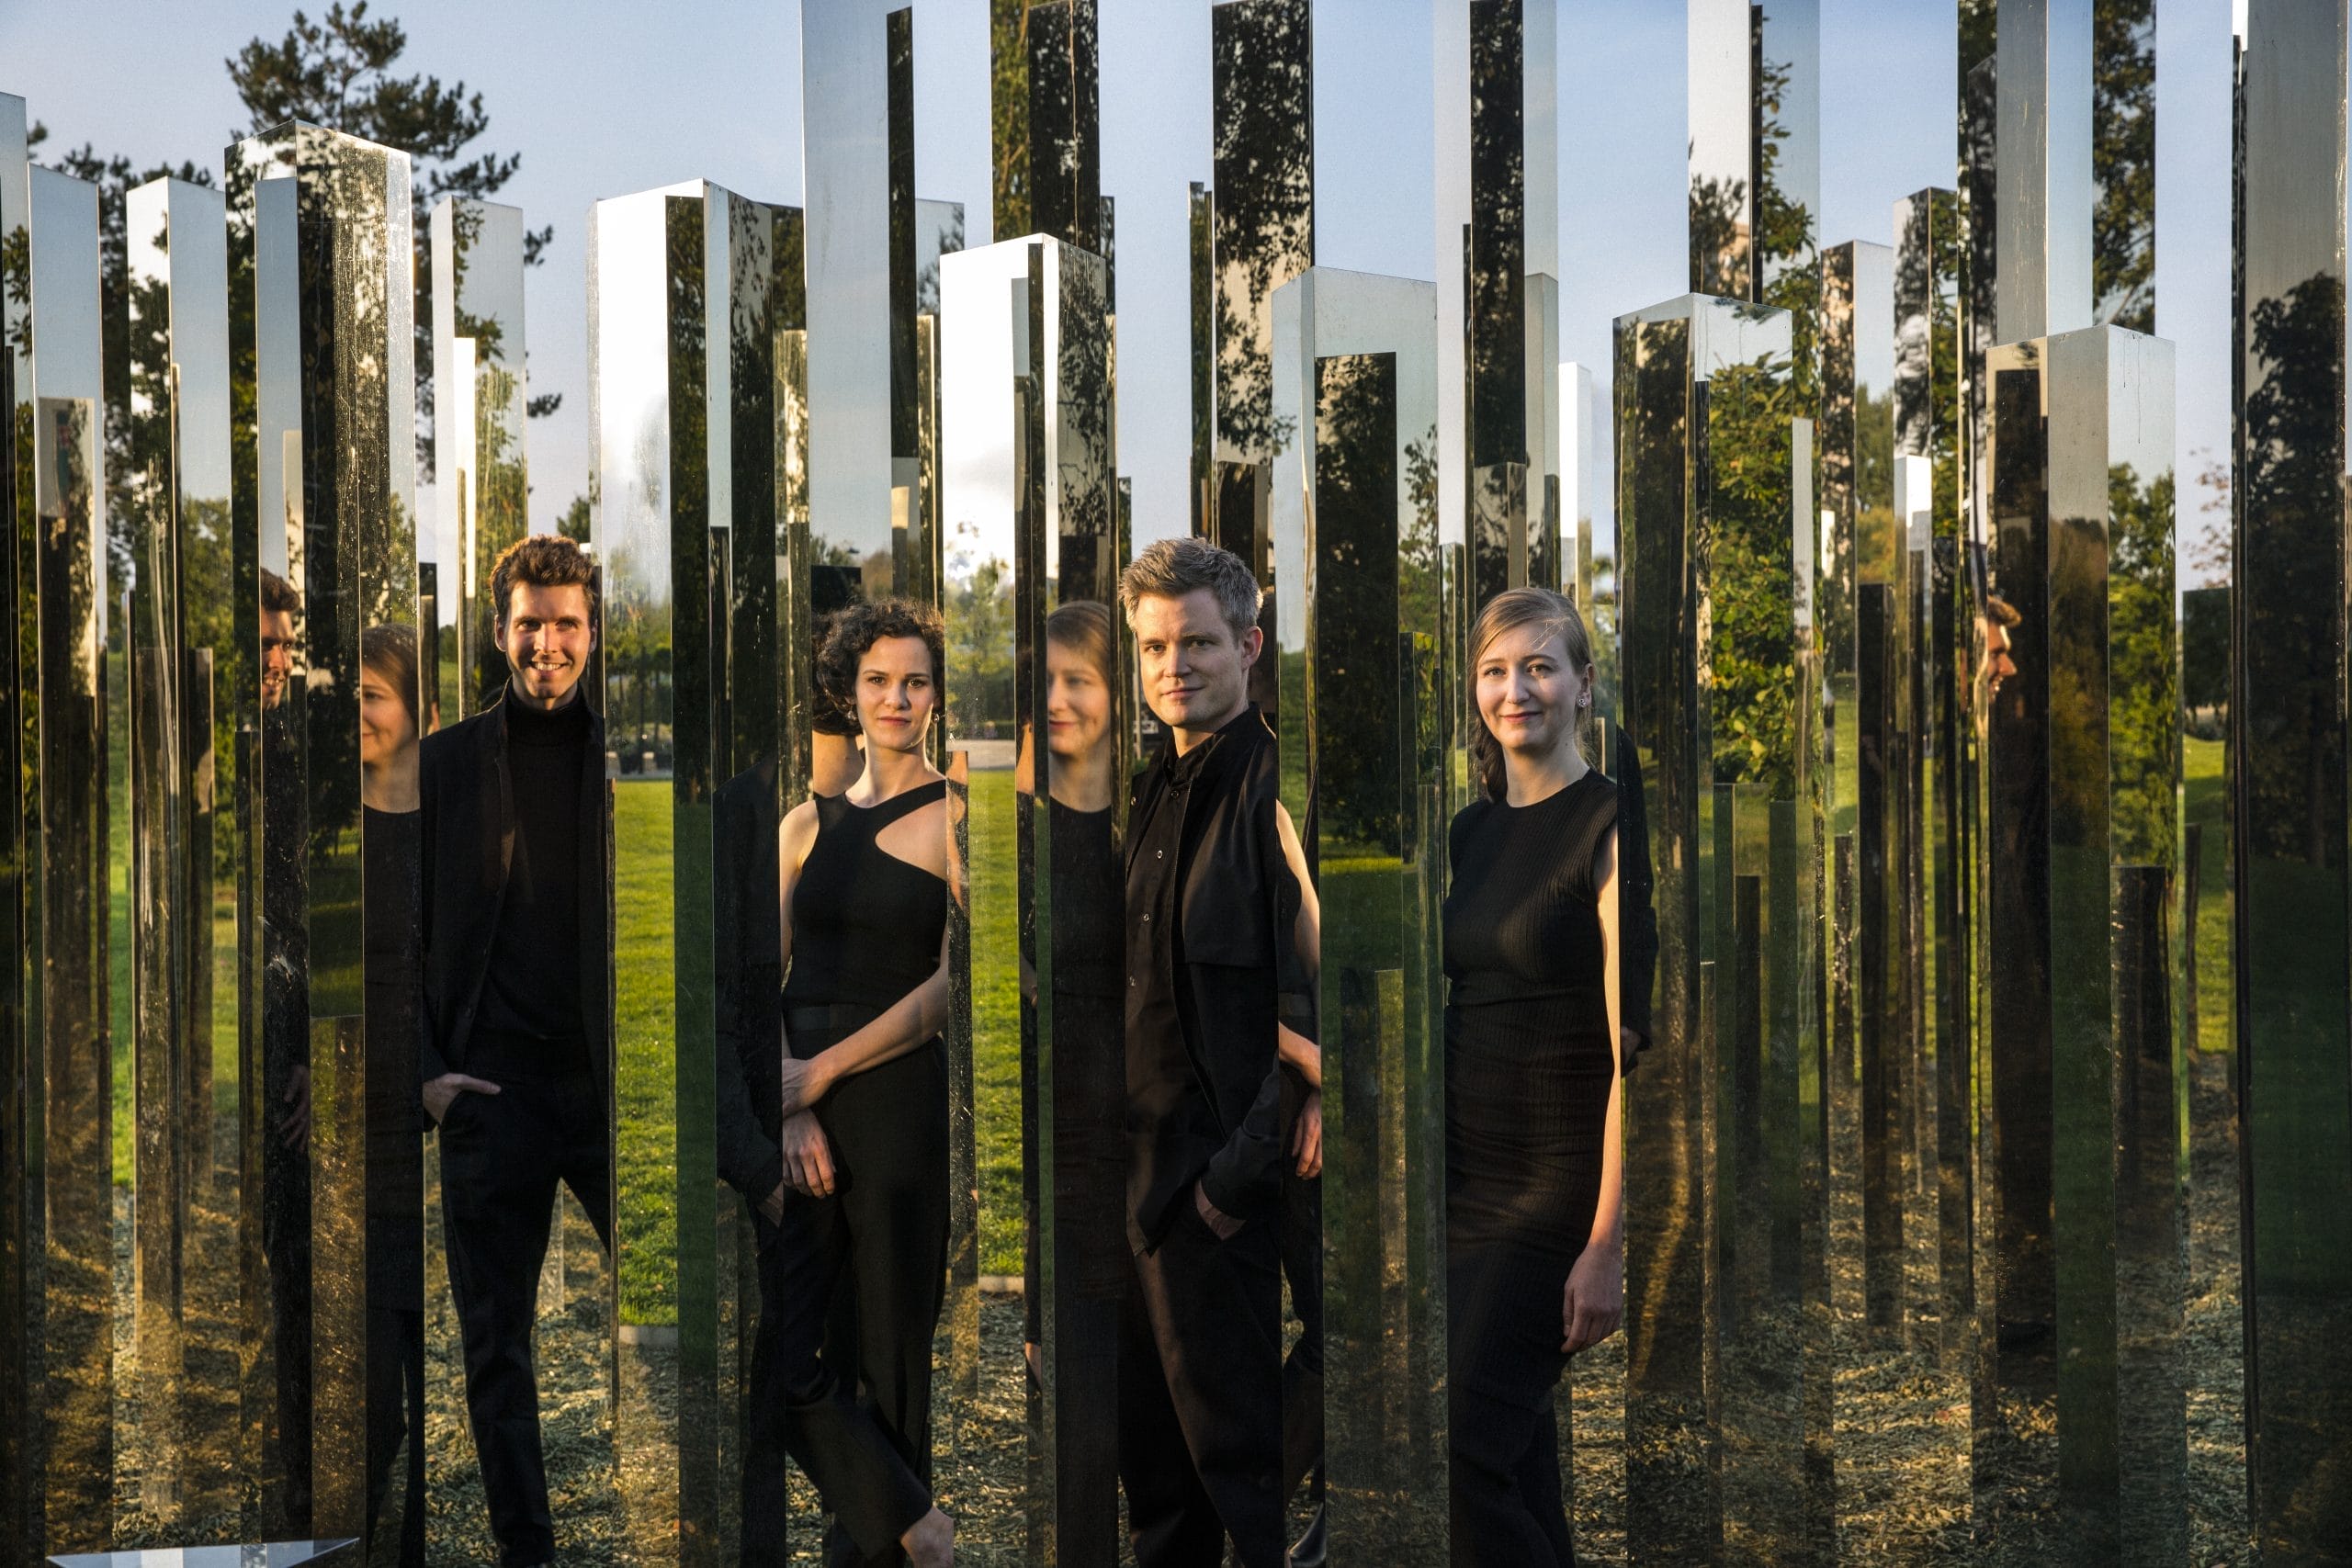 Two women and two men dressed in black standing in a grassy field in-between lots of fragments of mirrors